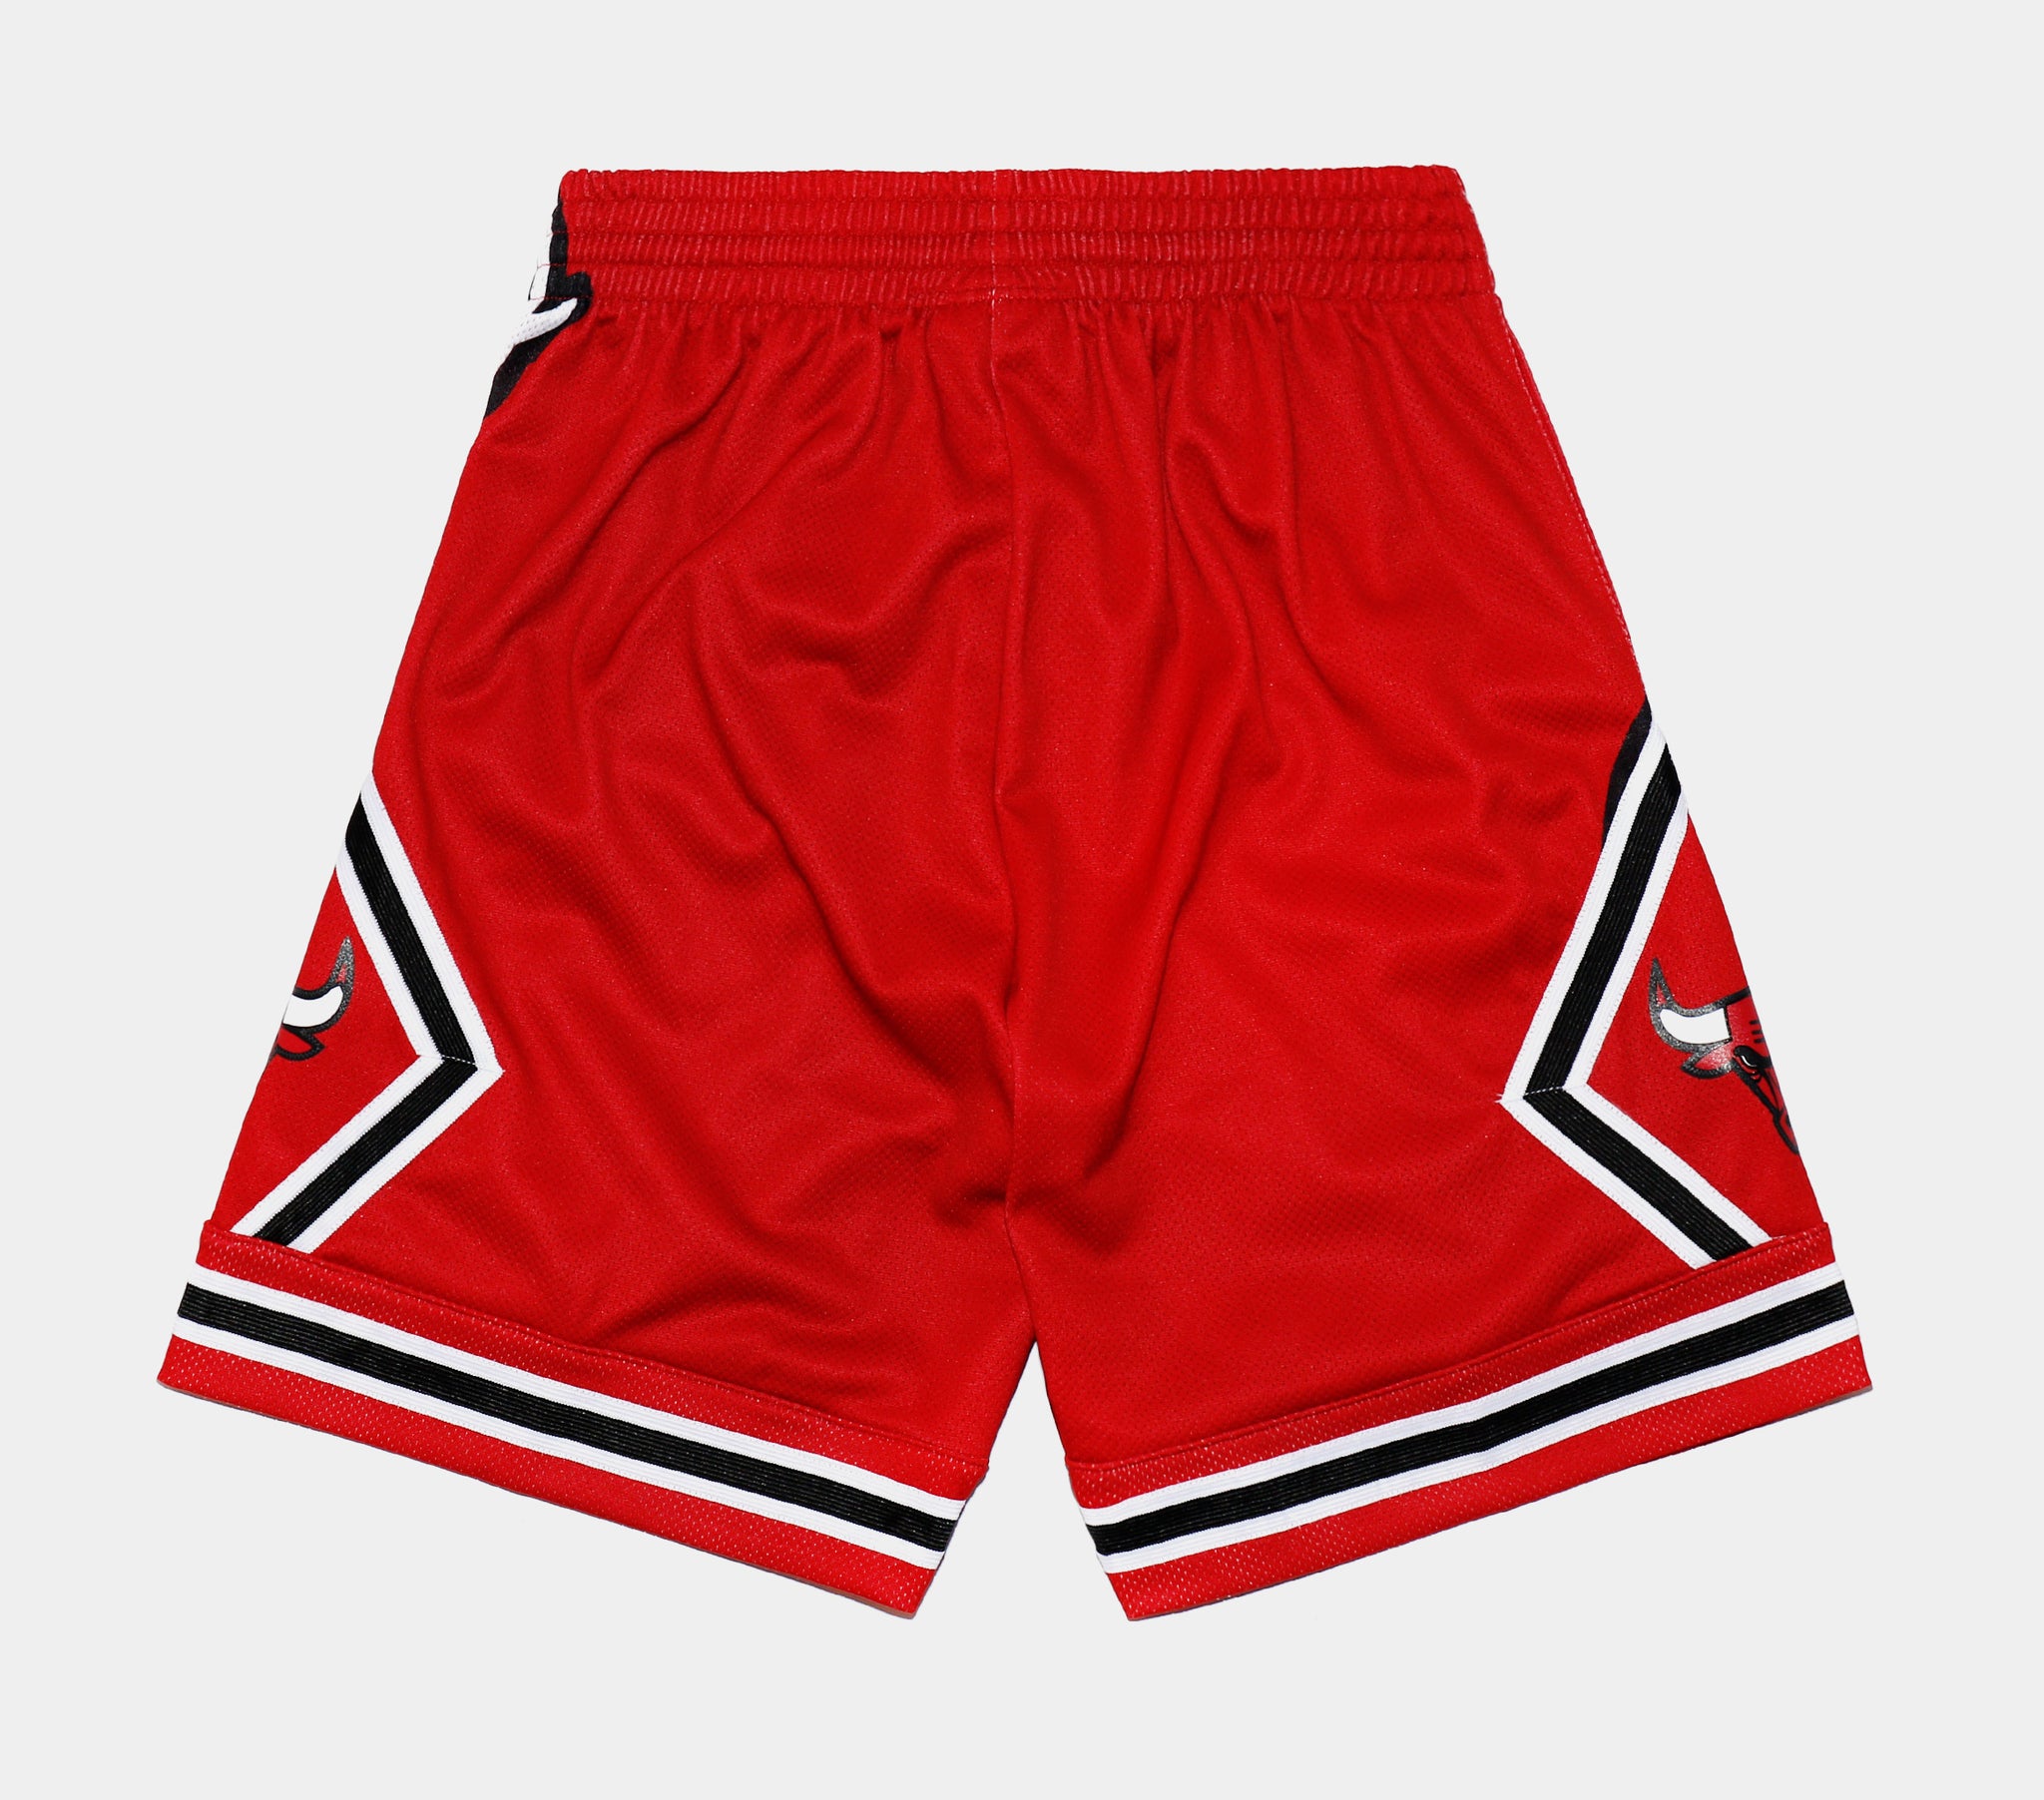 Mitchell & Ness Big Face 2.0 Shorts Chicago Bulls Red L / Red